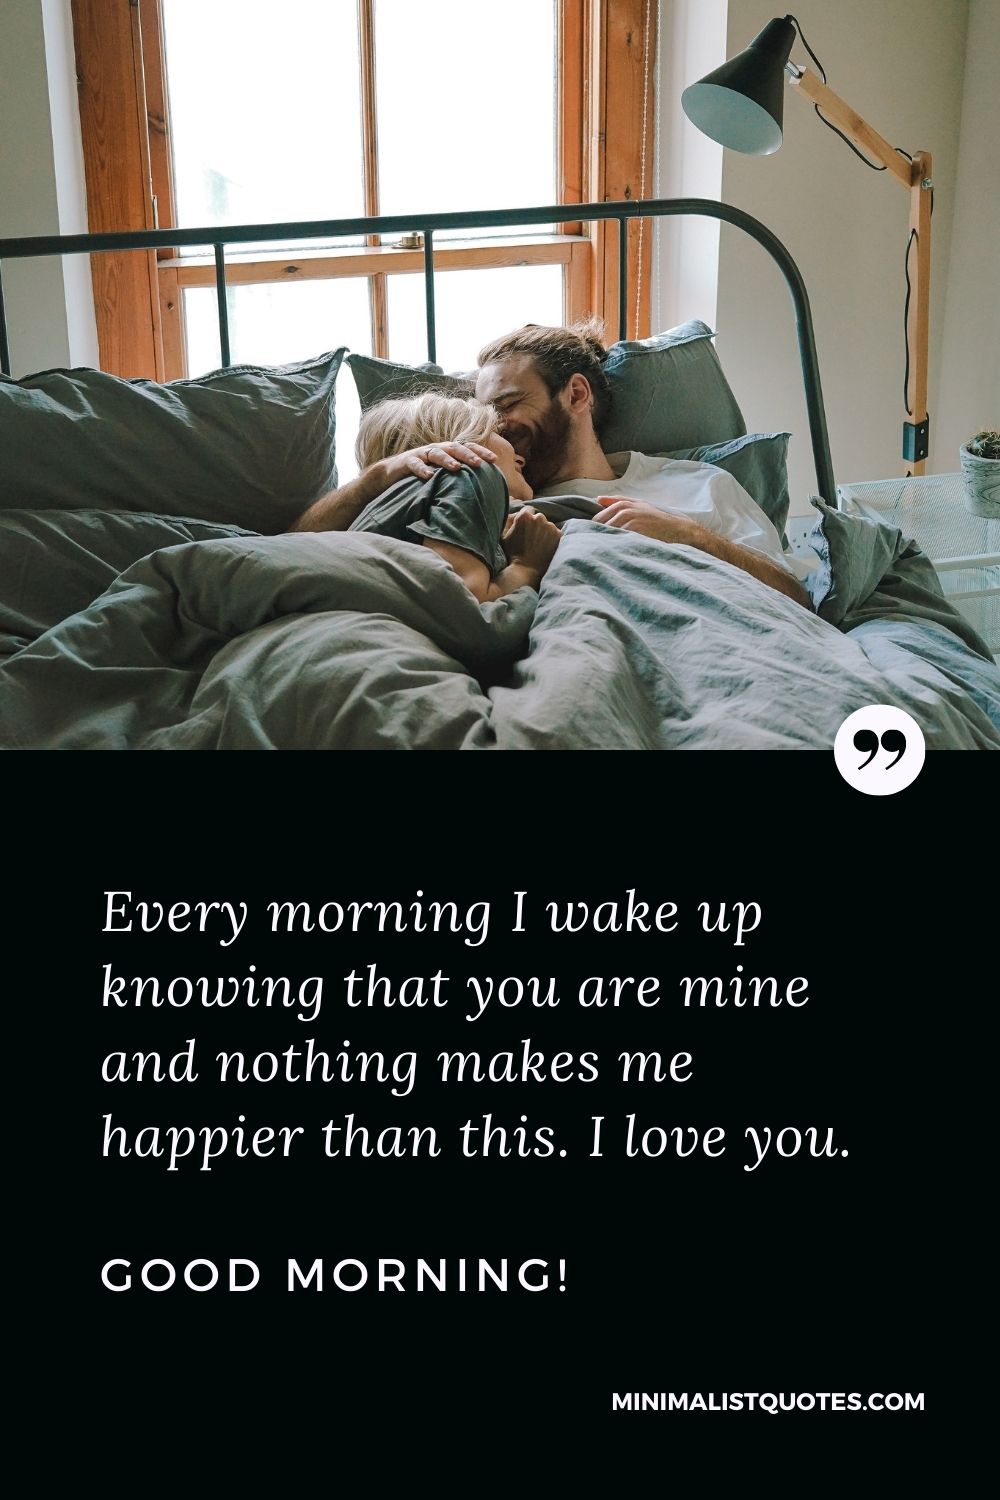 Good Morning I Love You Quote & Message: Every morning I wake up knowing that you are mine and nothing makes me happier than this. I love you. Good Morning!